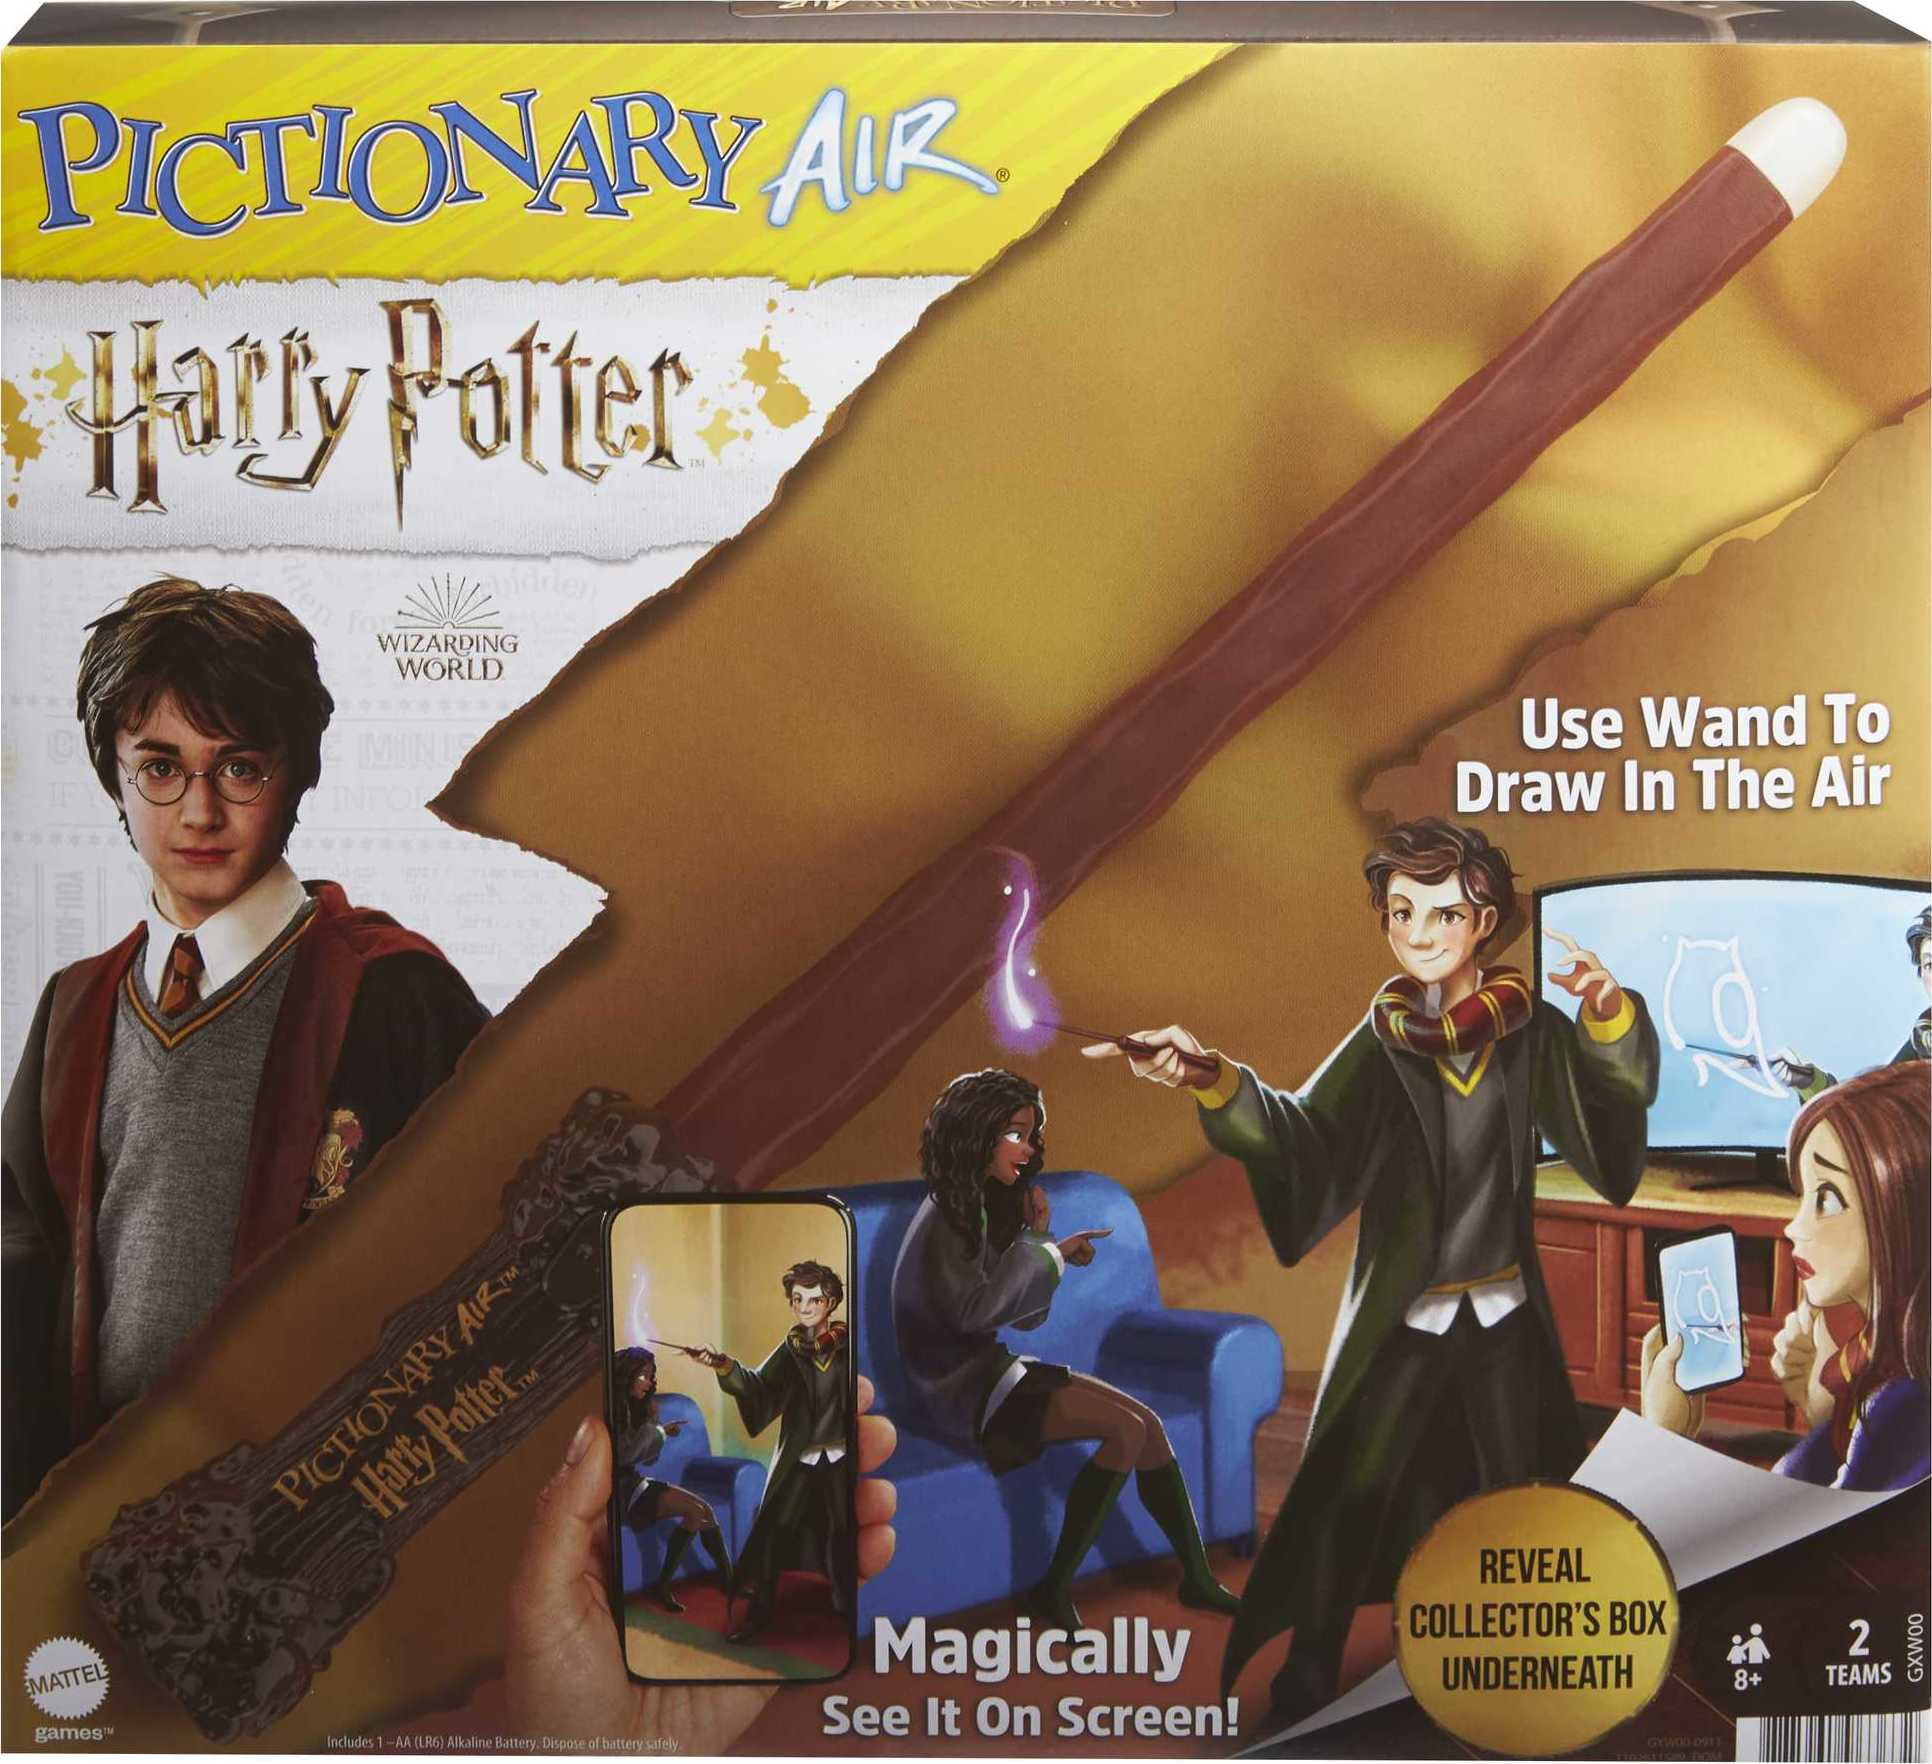 prepare to watch all harry potter movies in a row